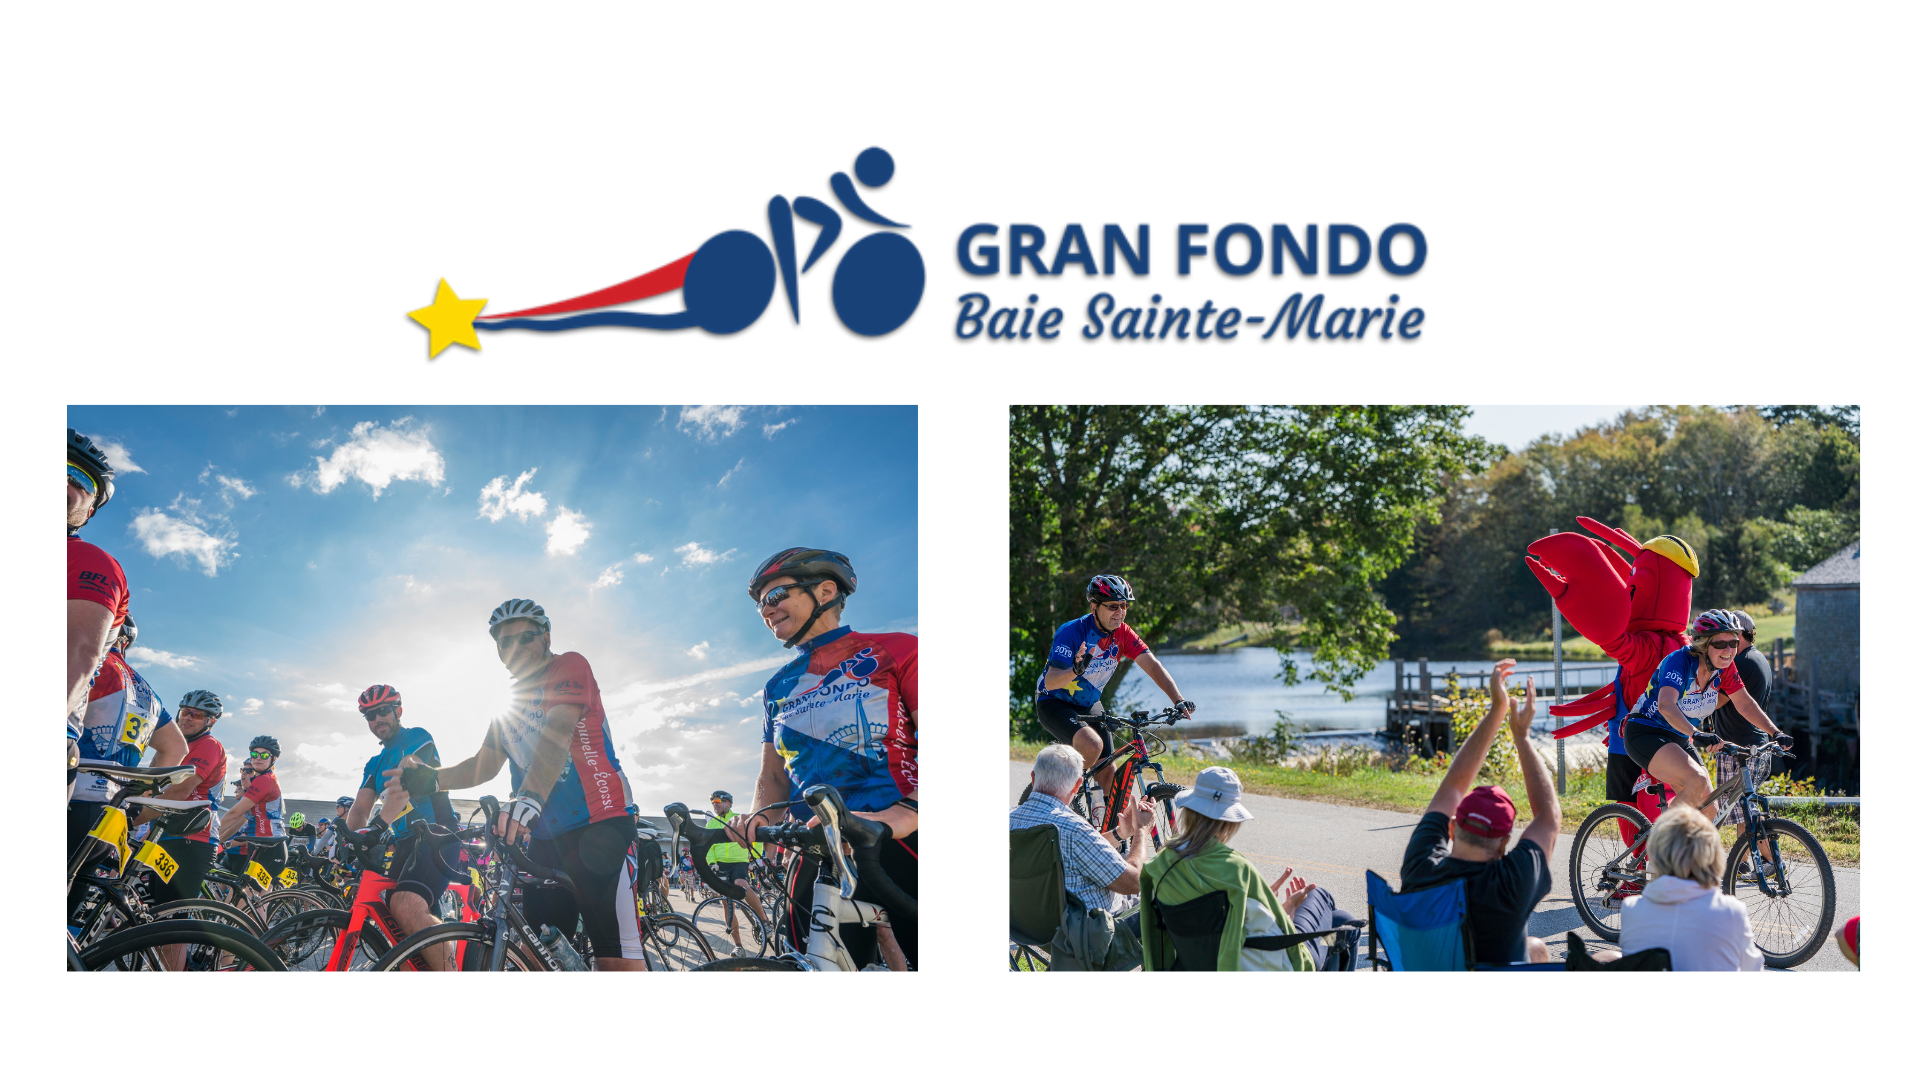 Two images of cyclists during the 2019 Gran Fondo Baie Sainte-Marie and the Gran Fondo Baie Sainte-Marie logo.